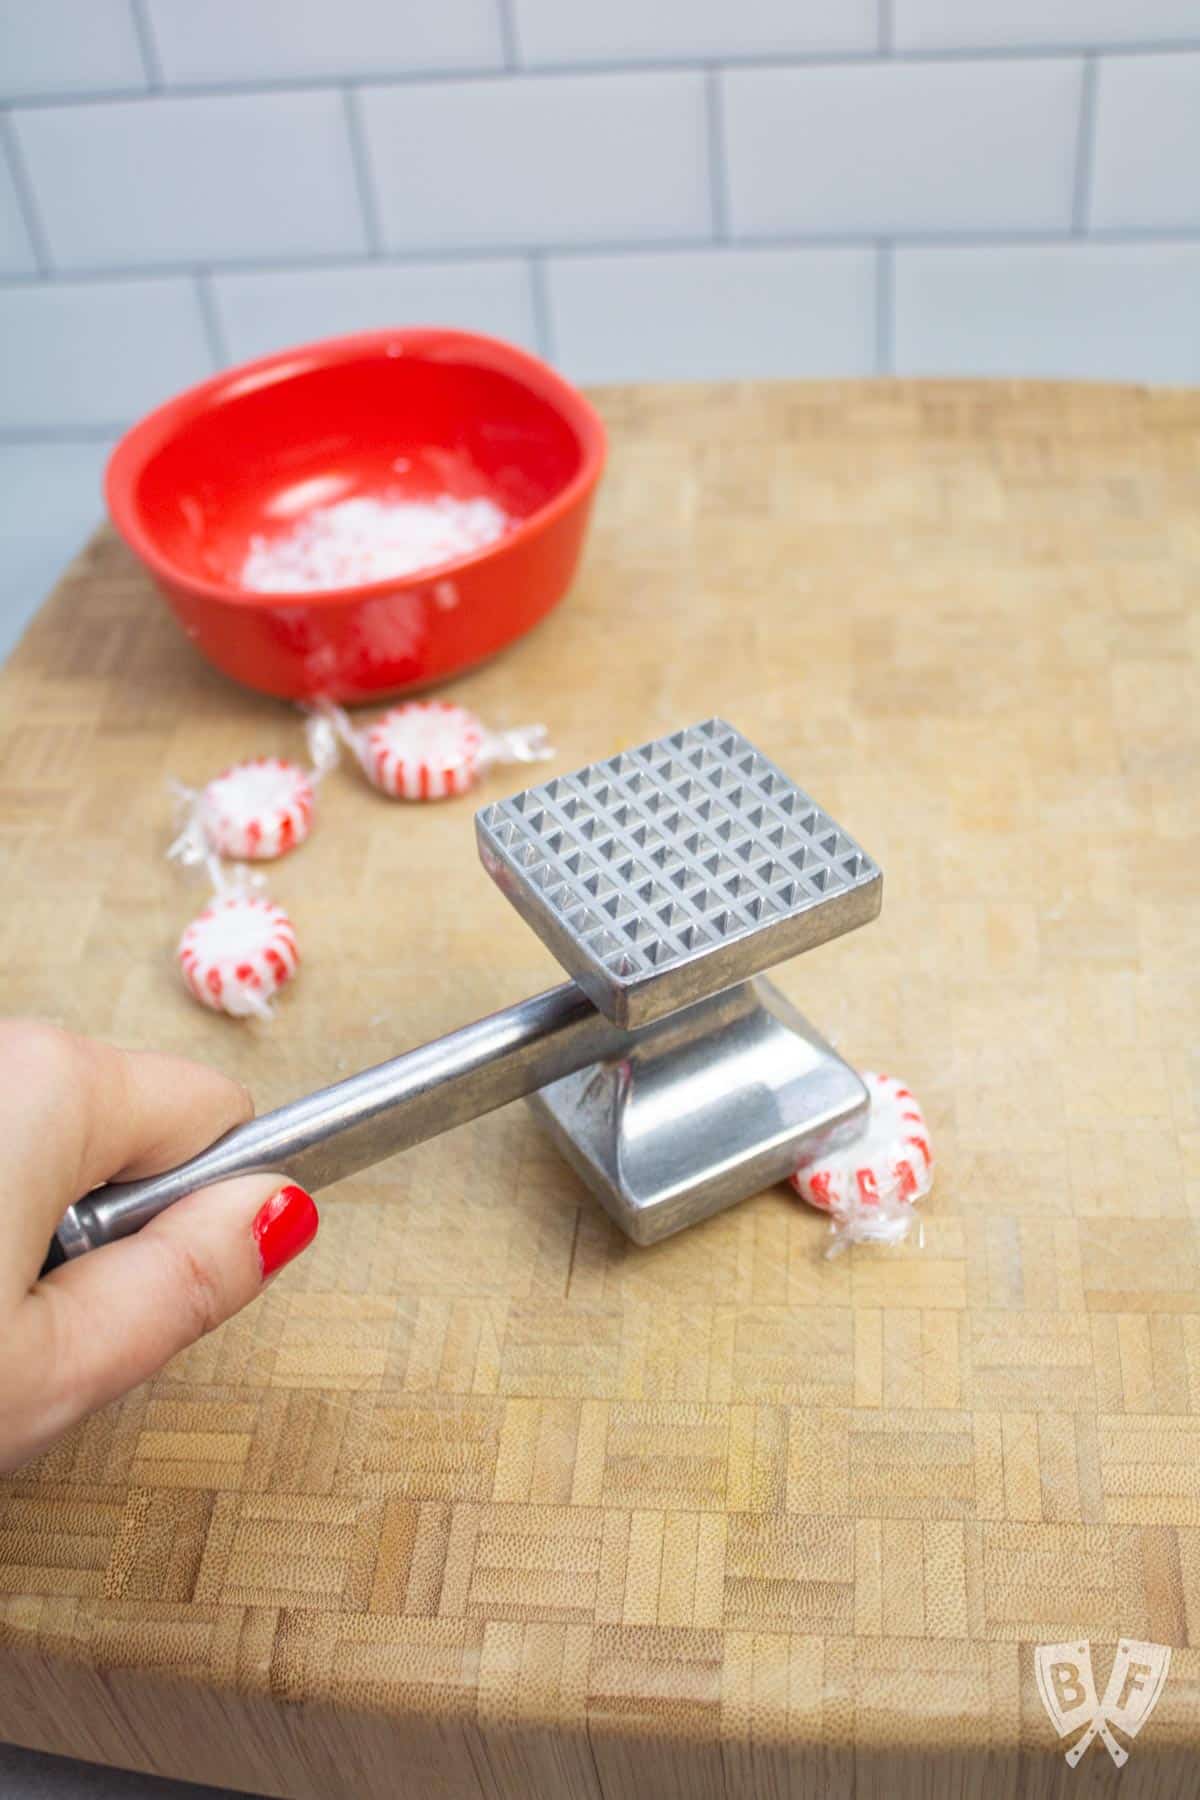 Crushing peppermint candies with a meat tenderizer.